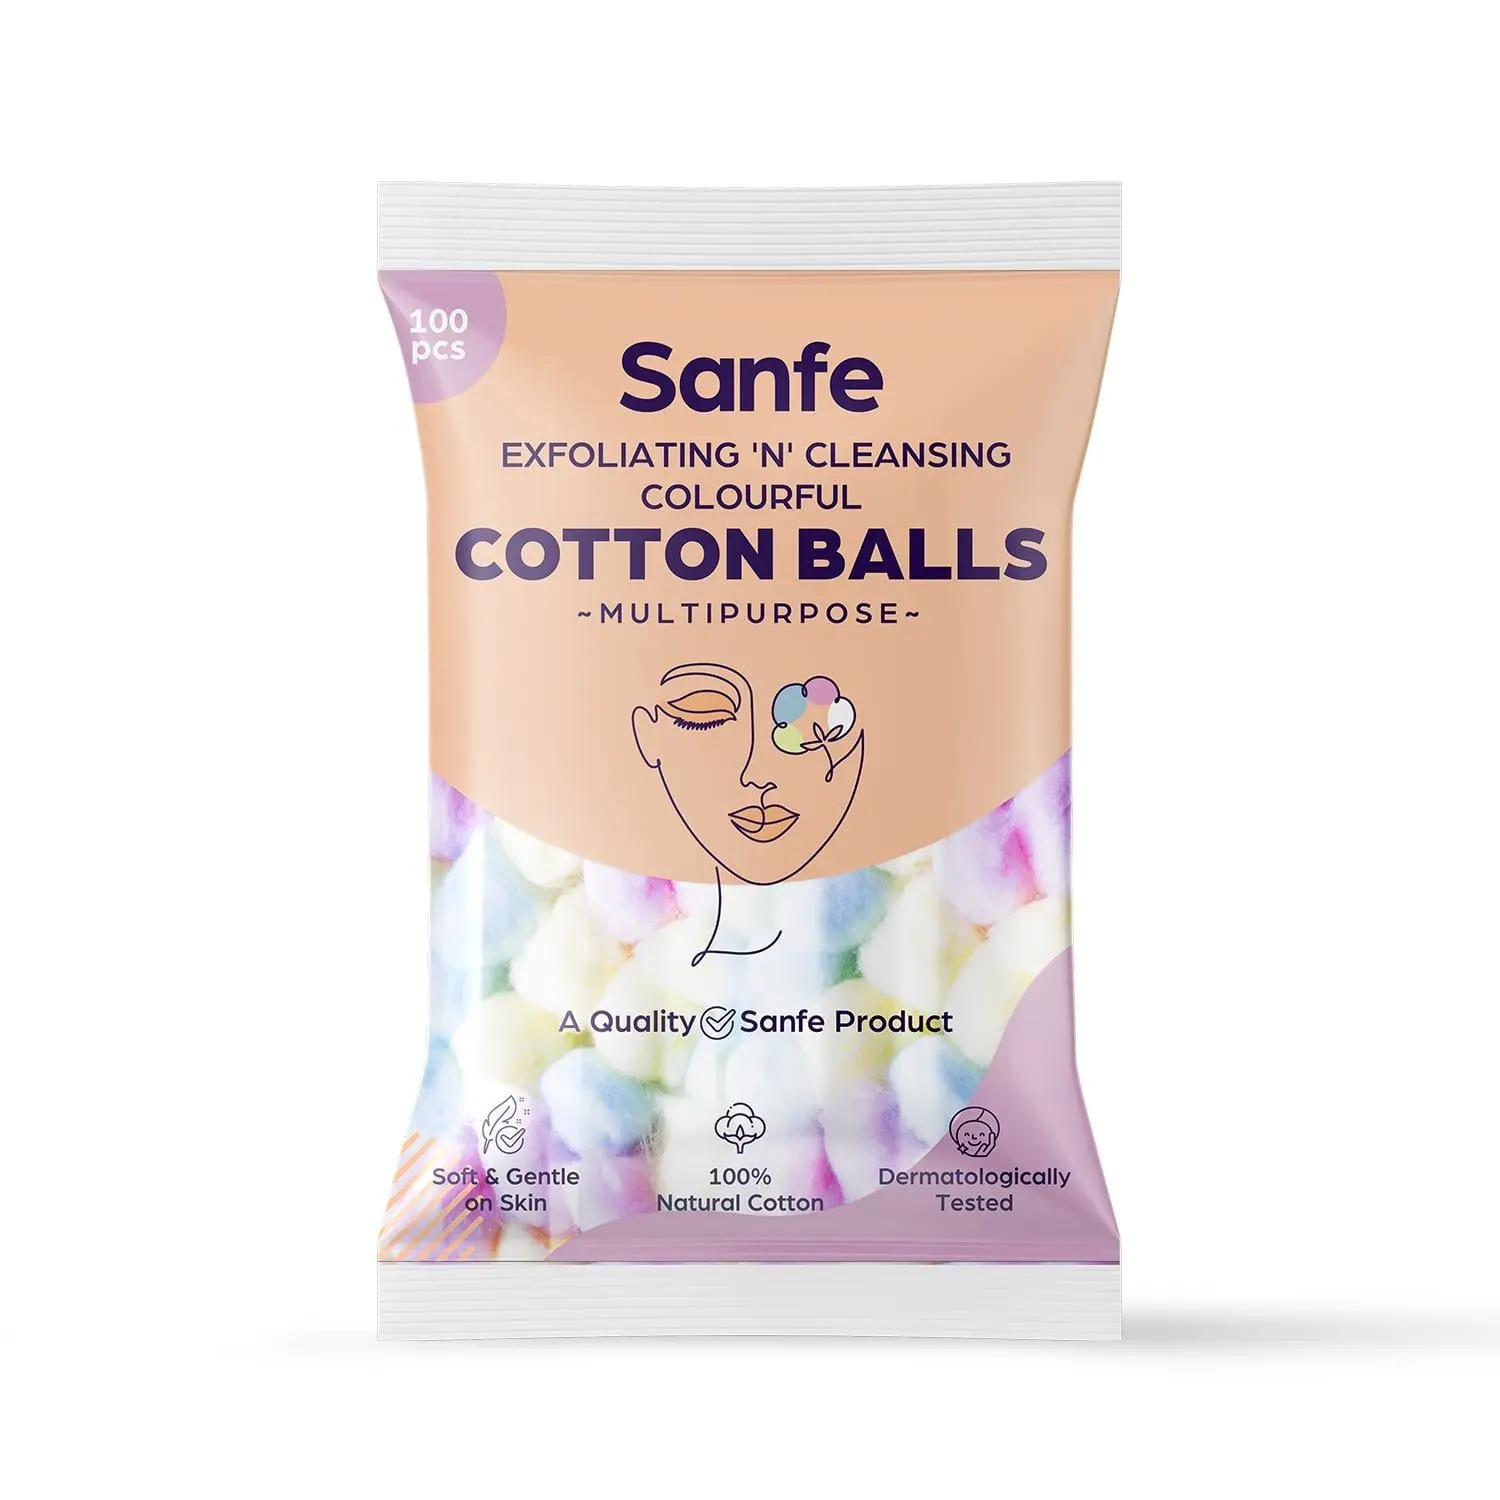 Sanfe Exfoliating 'N' Cleansing Colourful Cotton Balls - For Face Cleansing & Makeup Removal, Colourful - 100 Pieces